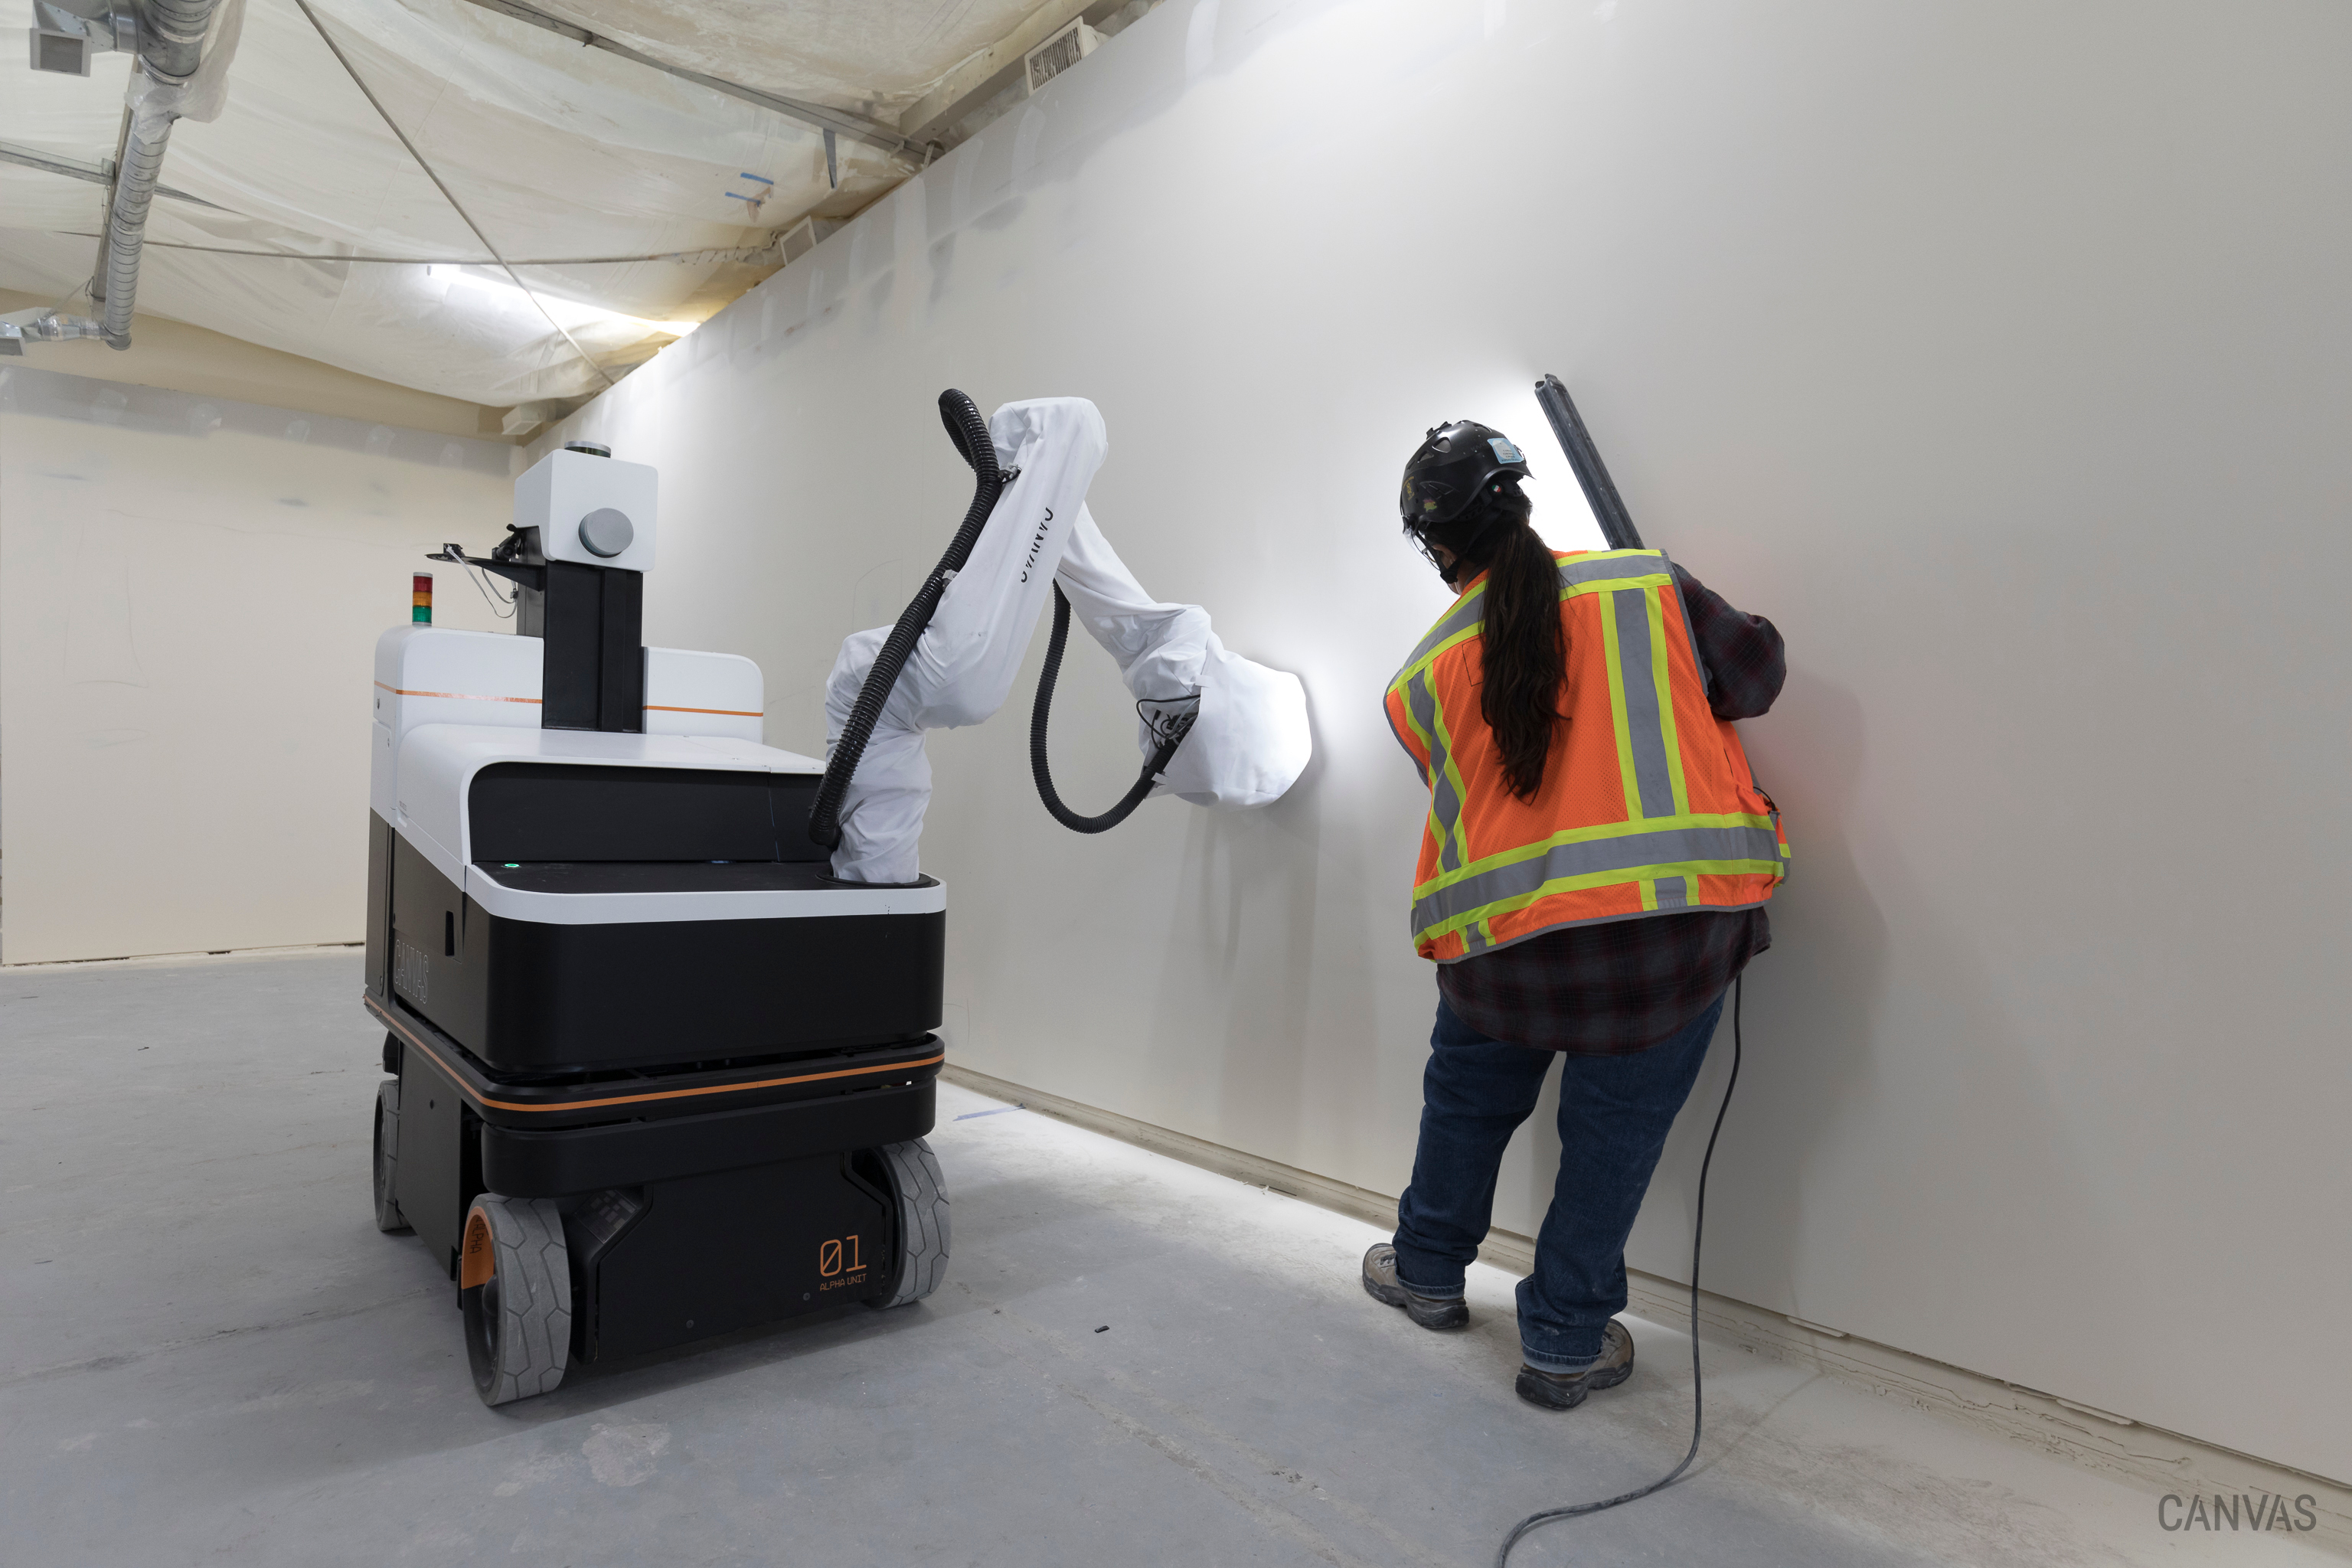 Robotics Startup Canvas Announces Innovation Program with Select Partners to Transform Drywall Finishing and Improve Lives | Walls & Ceilings